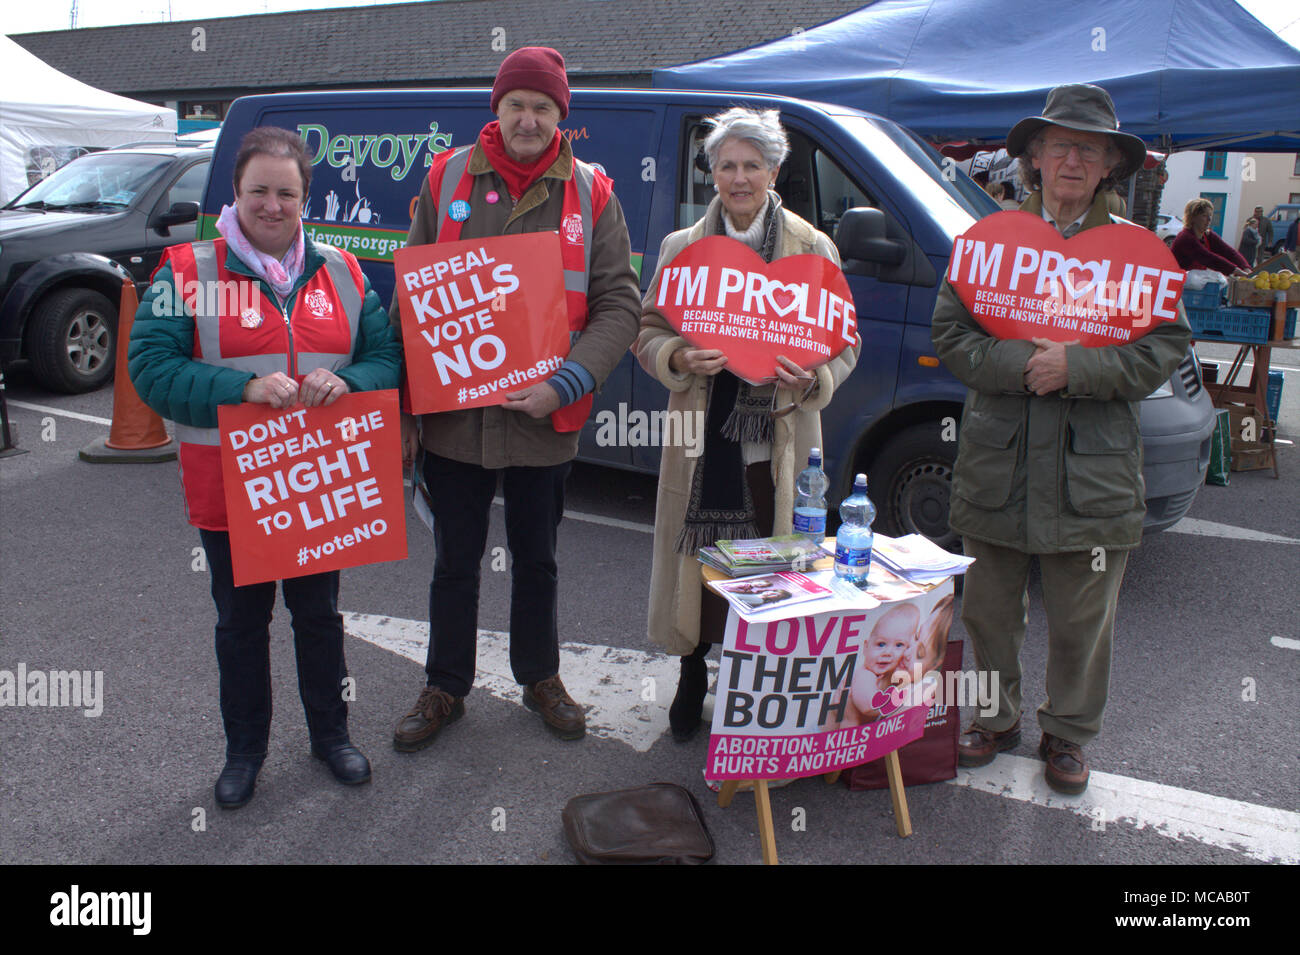 Skibbereen, West Cork, Ireland. 14th April 2018. Pro Life supporters demonstrating in the Farmers Market Skibbereen, against repeal of the 8th ammendment. Credit: aphperspective/Alamy Live News Stock Photo